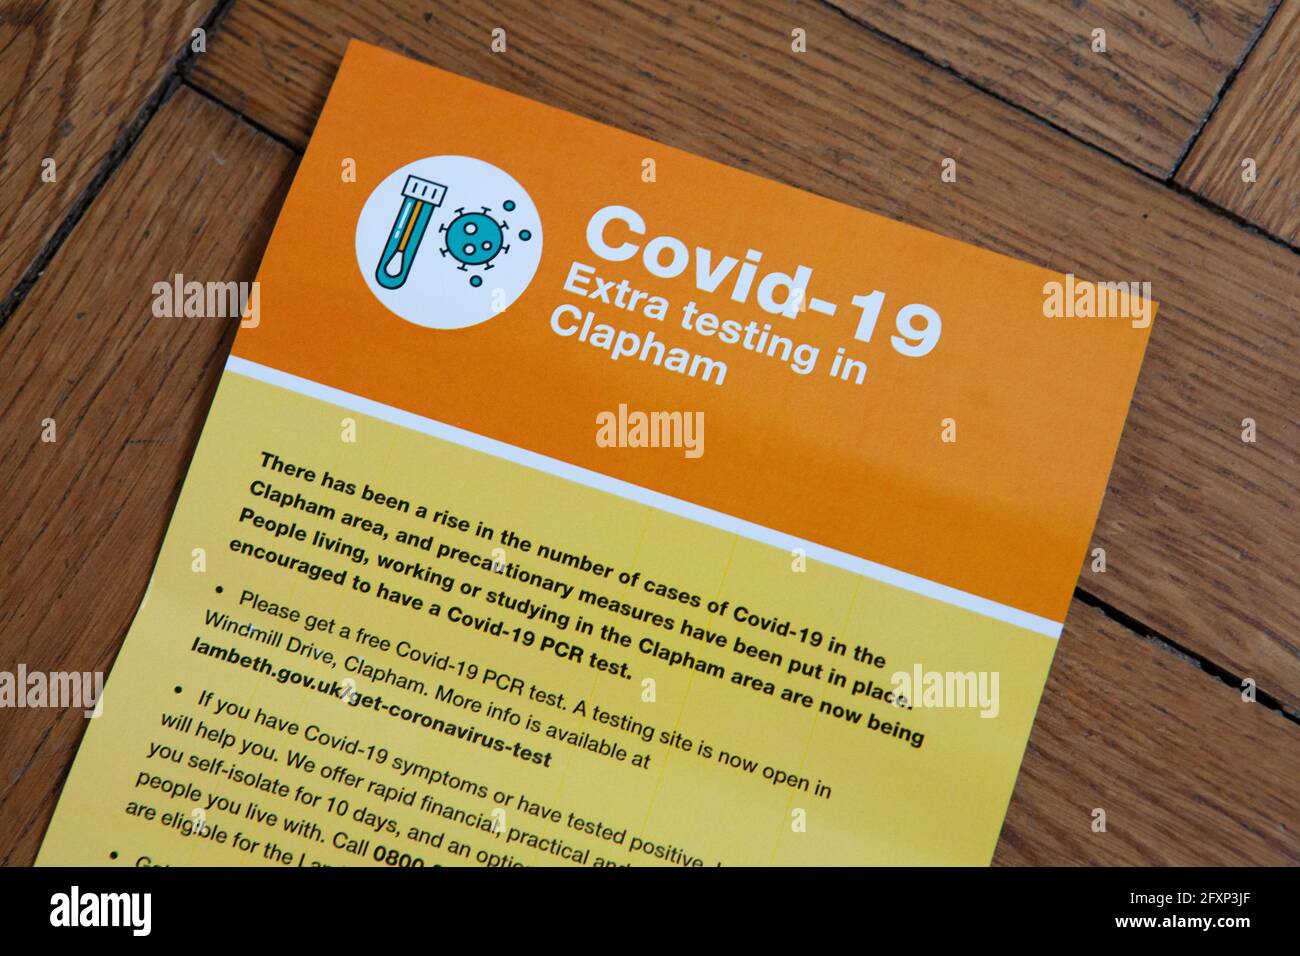 London, UK, 27 May 2021: Due to cases of the India variant of coronavirus in a local school, homes in the area have been sent leaflets by Lambeth Council asking residents to take a PCR test. A temporary centre for collecting kits has been set up on Clapham Common's Windmill Drive. Anna Watson/Alamy Live News Stock Photo